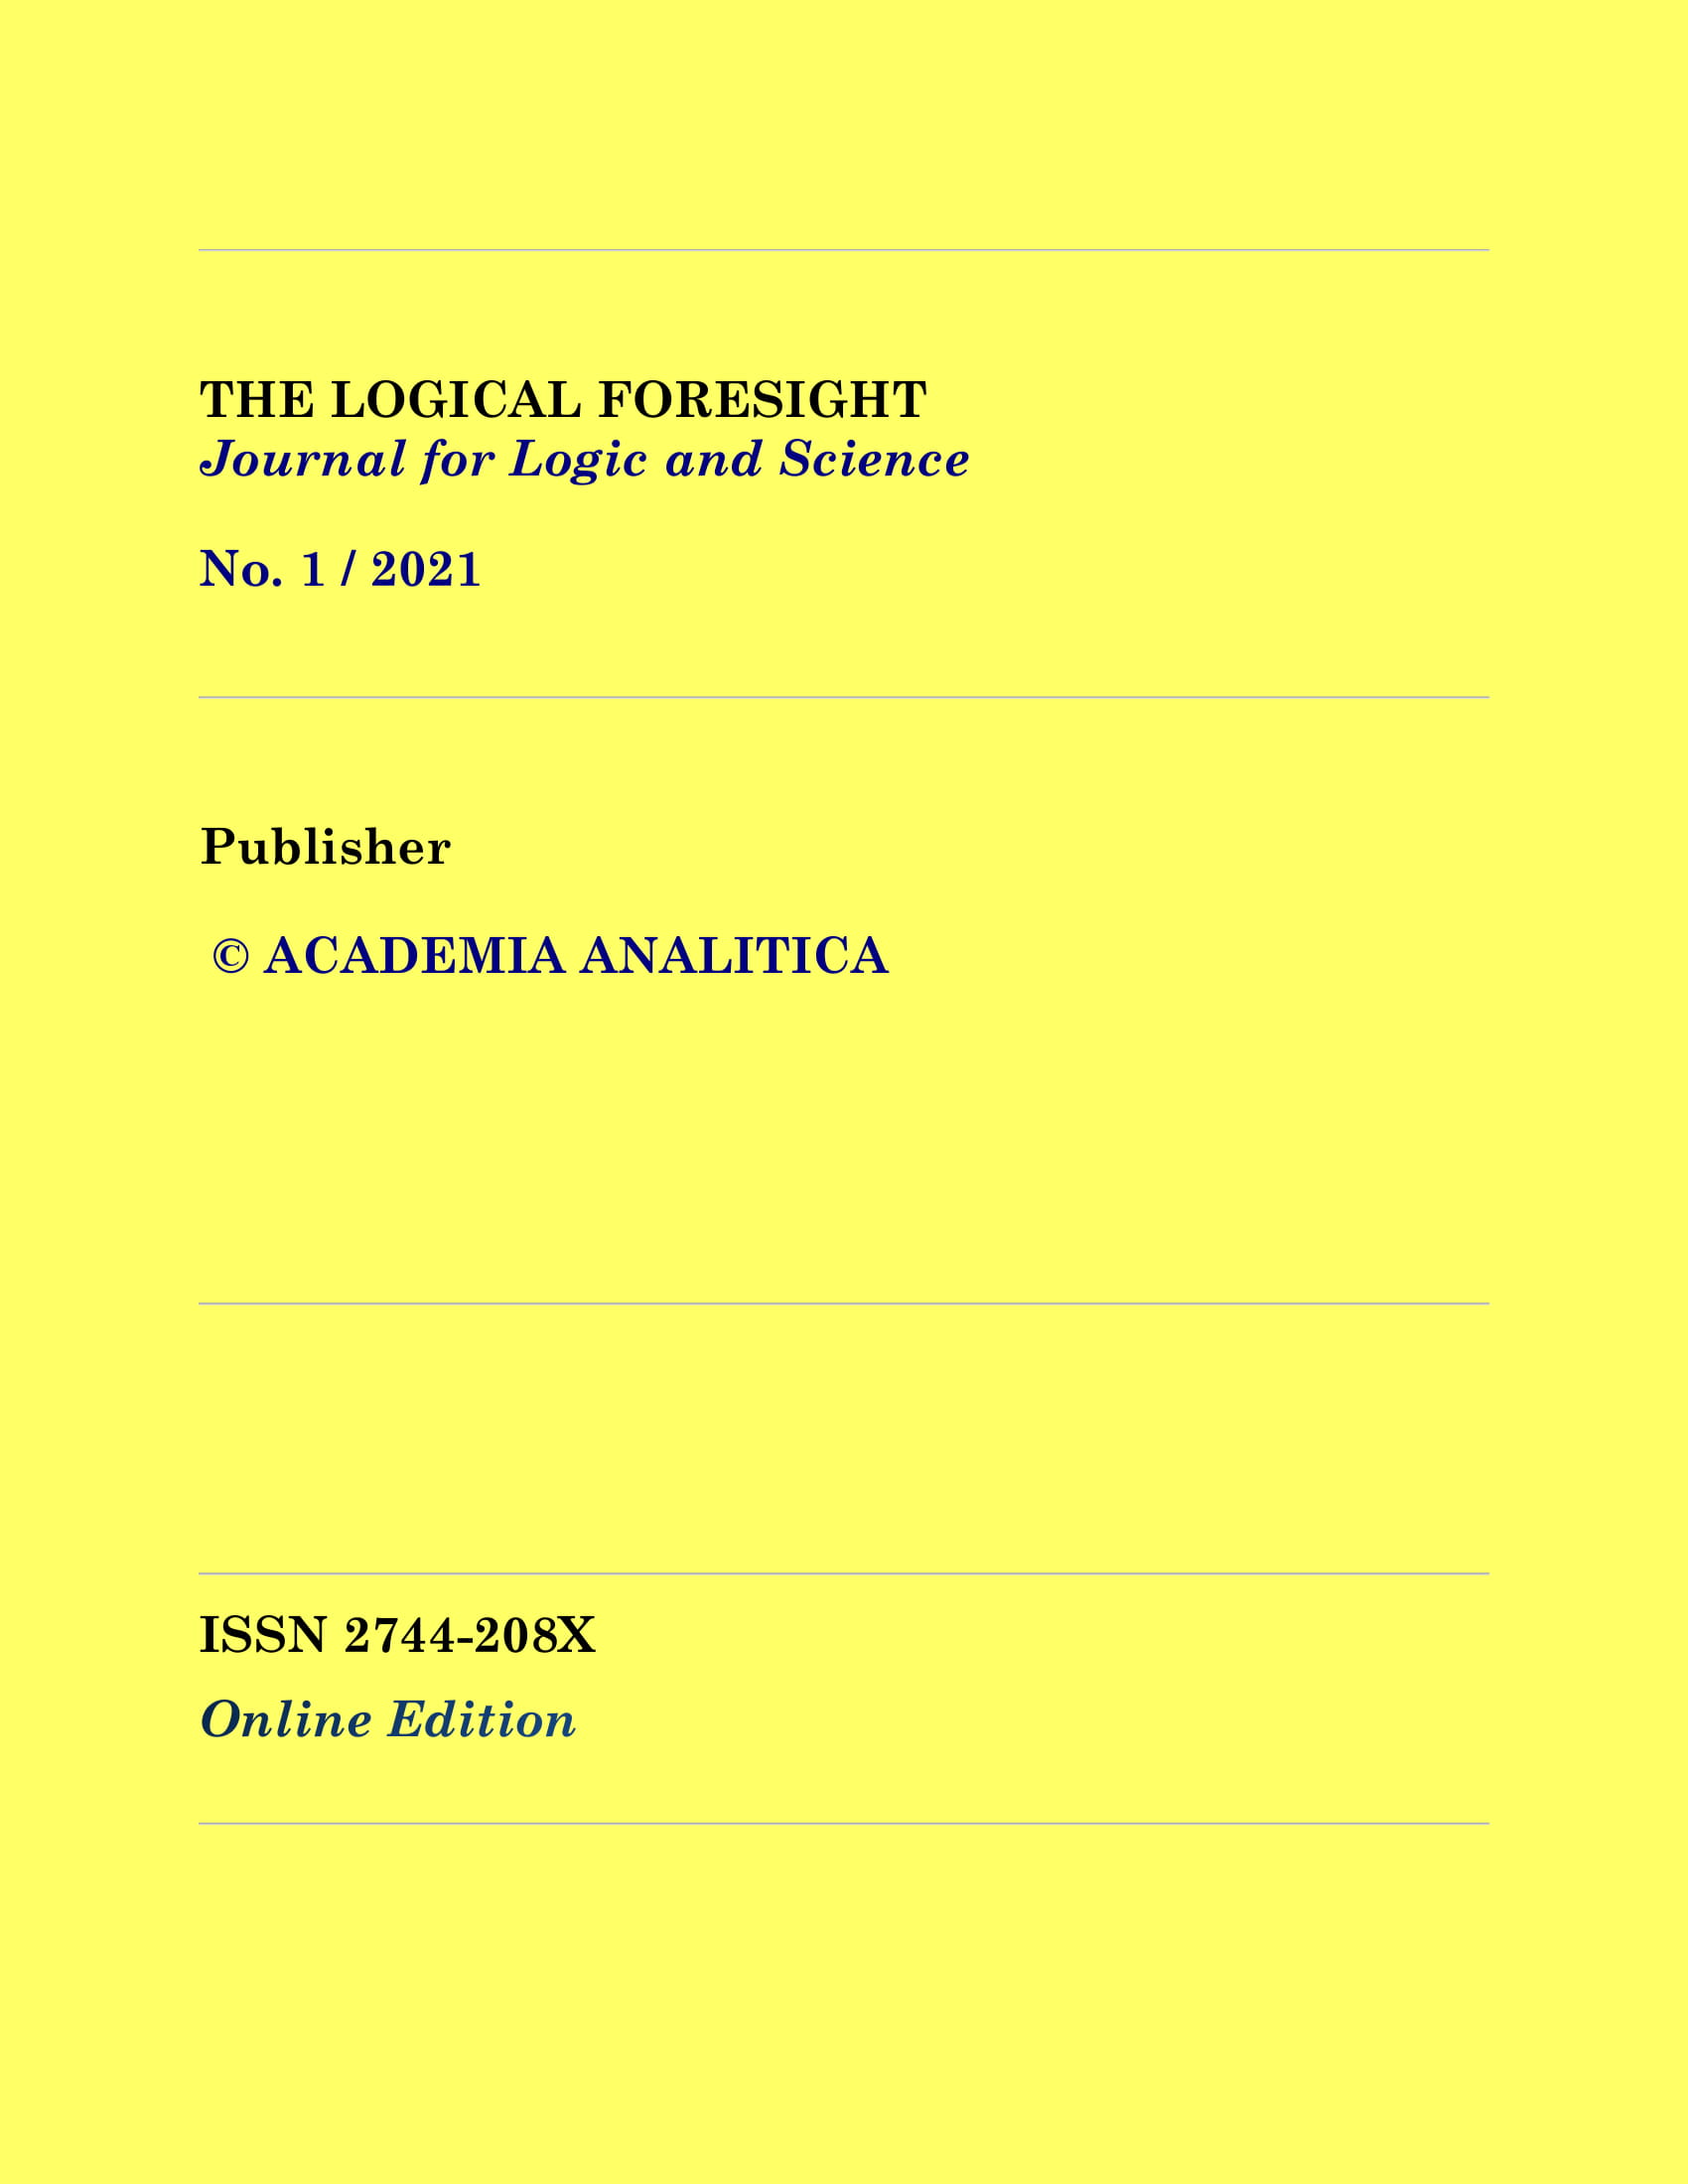 					View Vol. 1 No. 1 (2021): The Logical Foresight
				